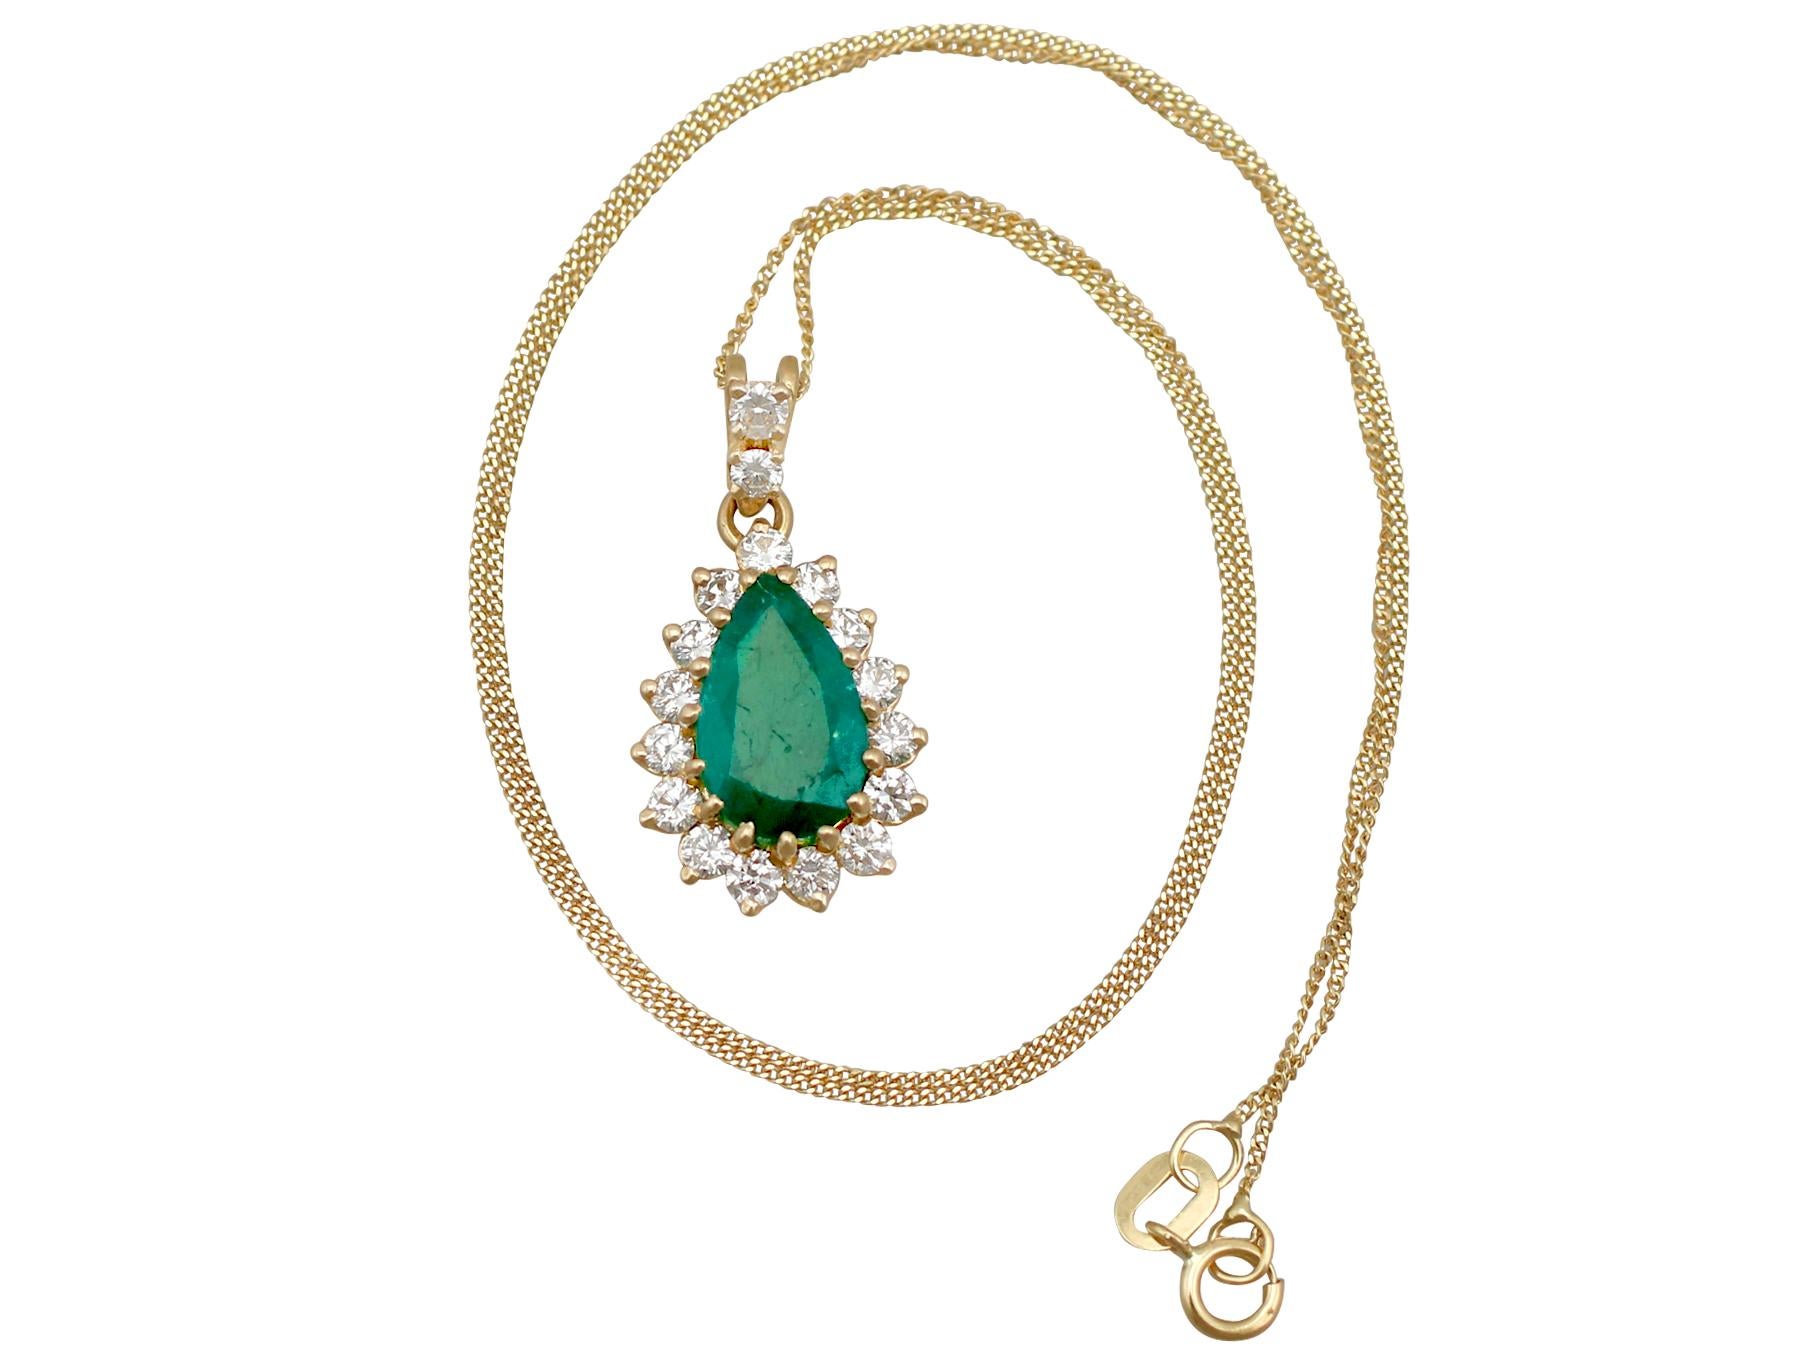 An impressive vintage 1.98 carat emerald and 0.68 carat diamond, 18 karat yellow gold pendant and chain; part of our diverse emerald jewellery and estate jewelry collections.

This fine and impressive vintage emerald and diamond pendant has been